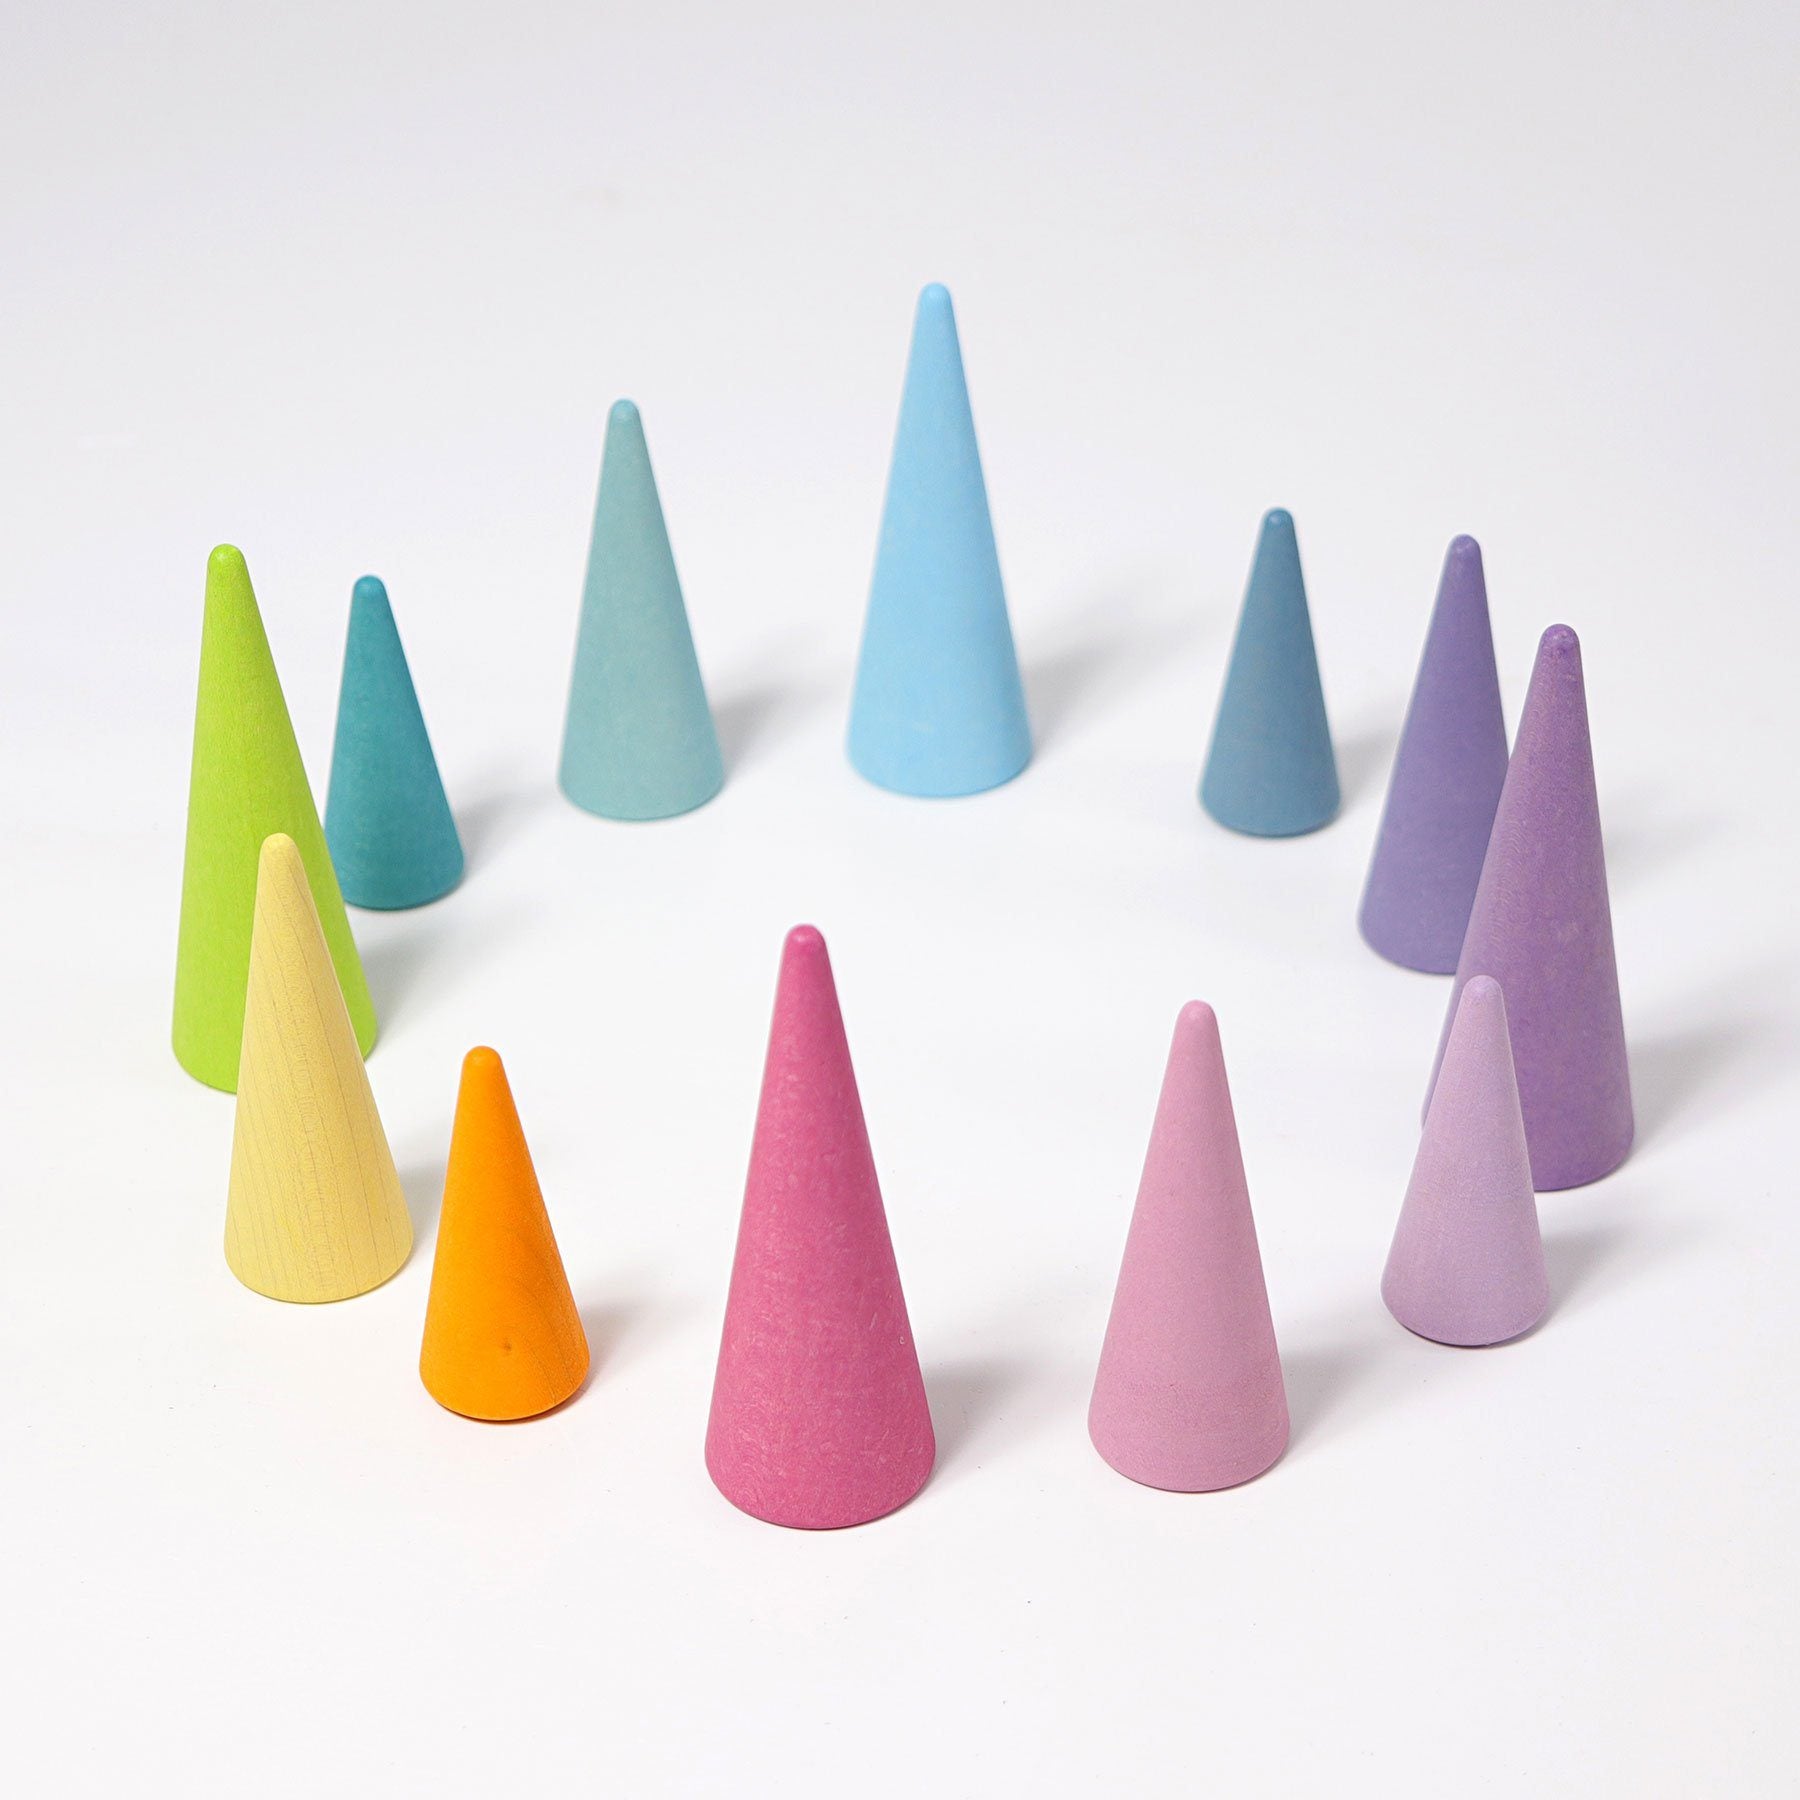 pastel forest; 12 colored cones in 3 varying heights